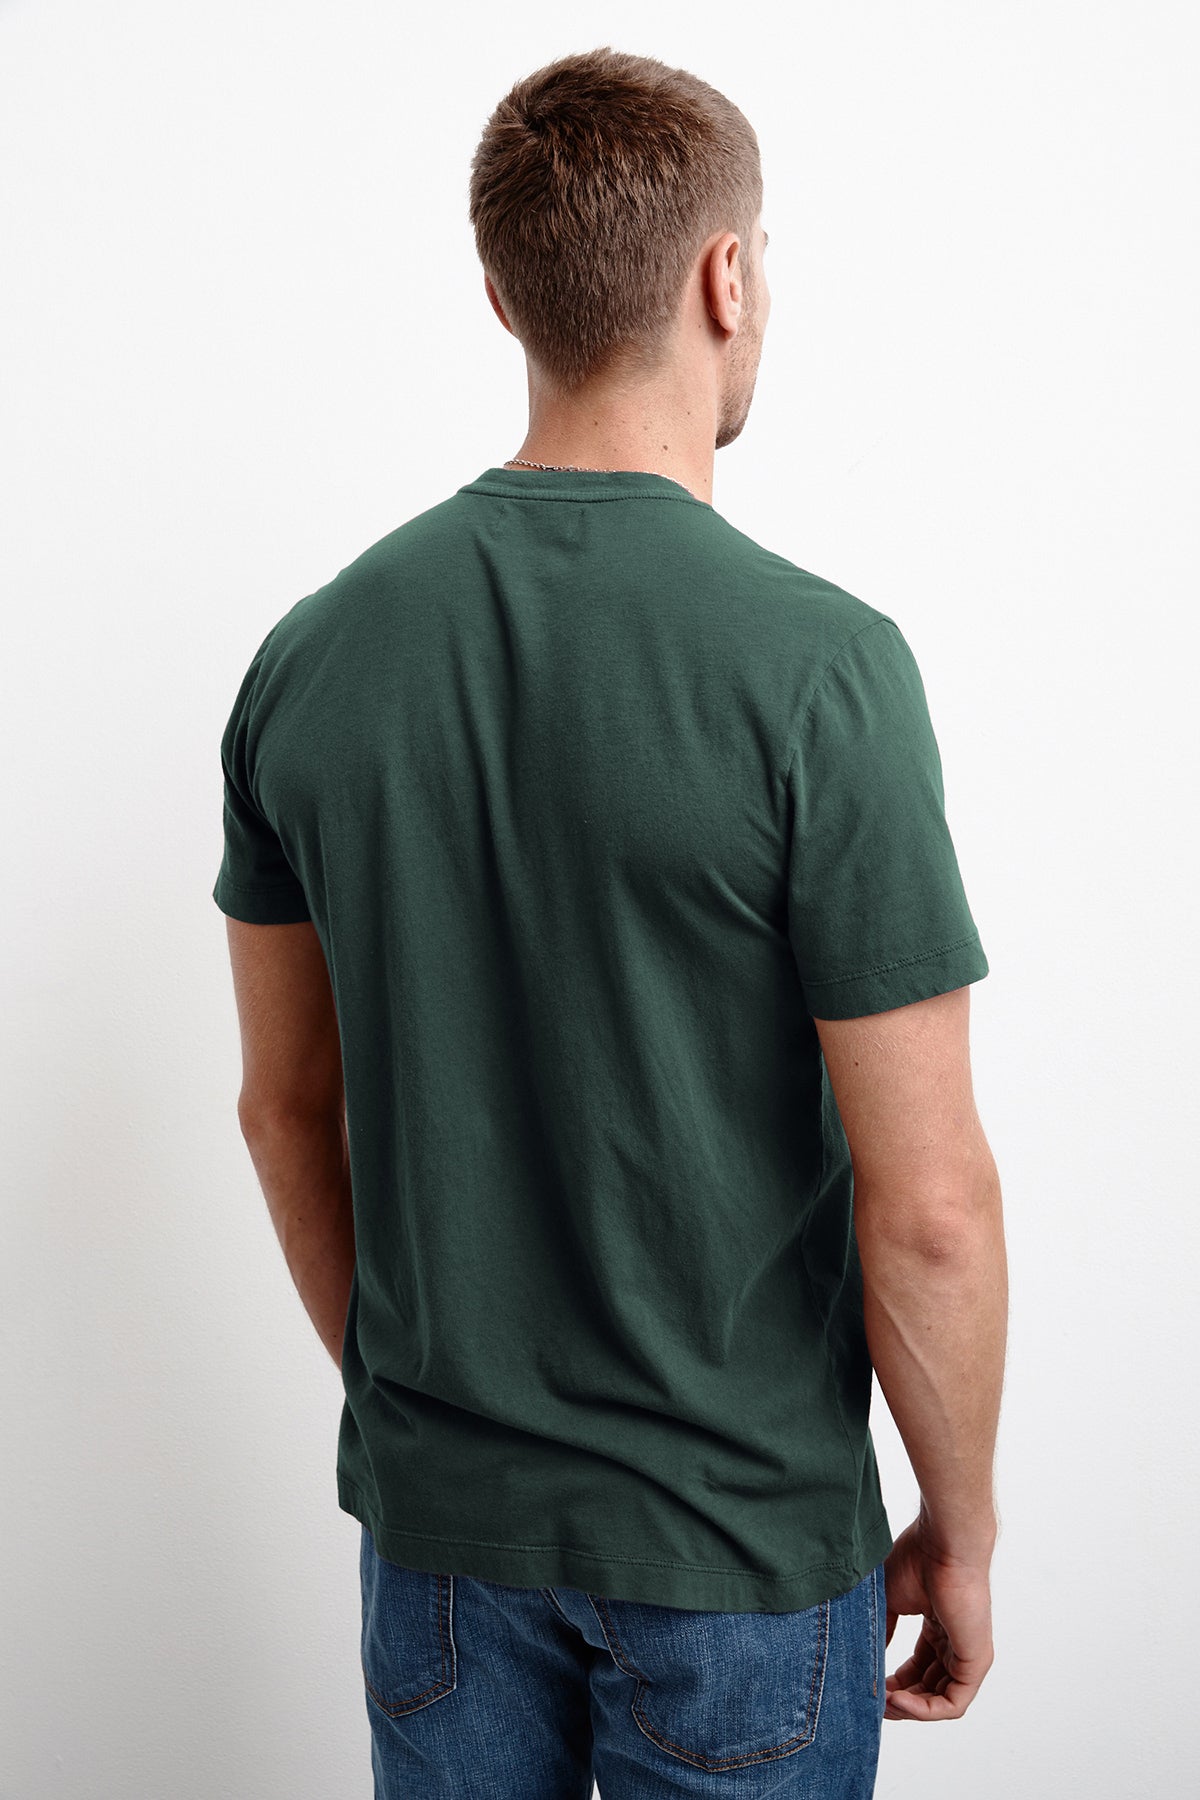 The back view of a man wearing a green Velvet by Graham & Spencer Howard Whisper Classic Crew Neck Tee.-1012412416081